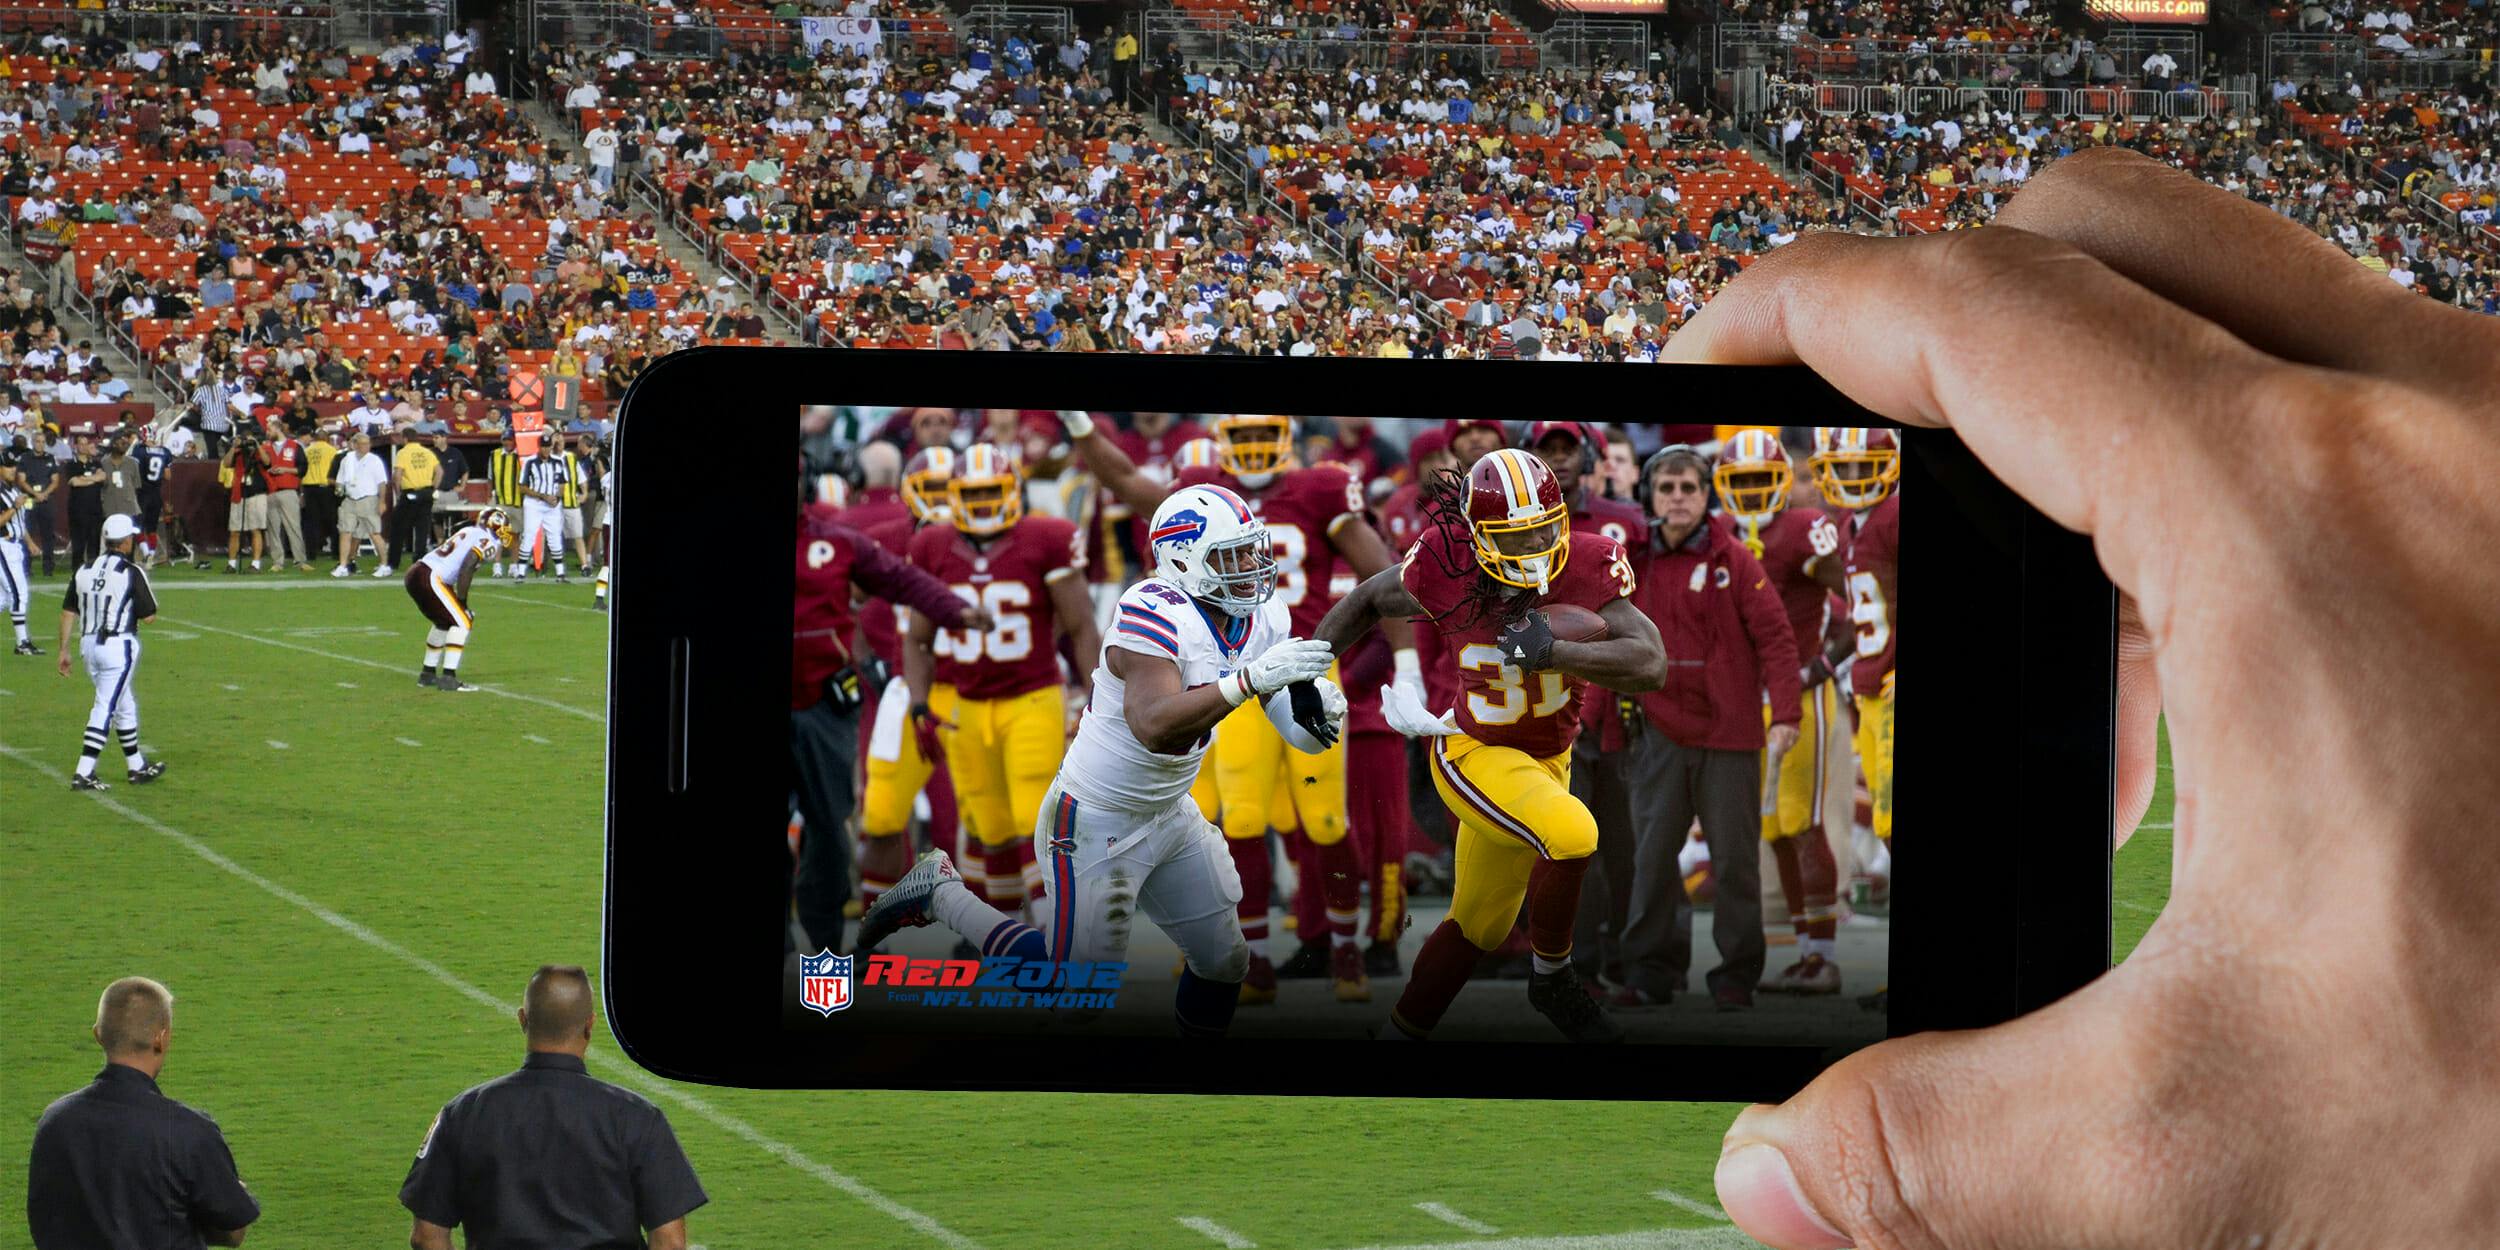 Stream NFL RedZone Live: Watch the Best of the Sunday NFL Games